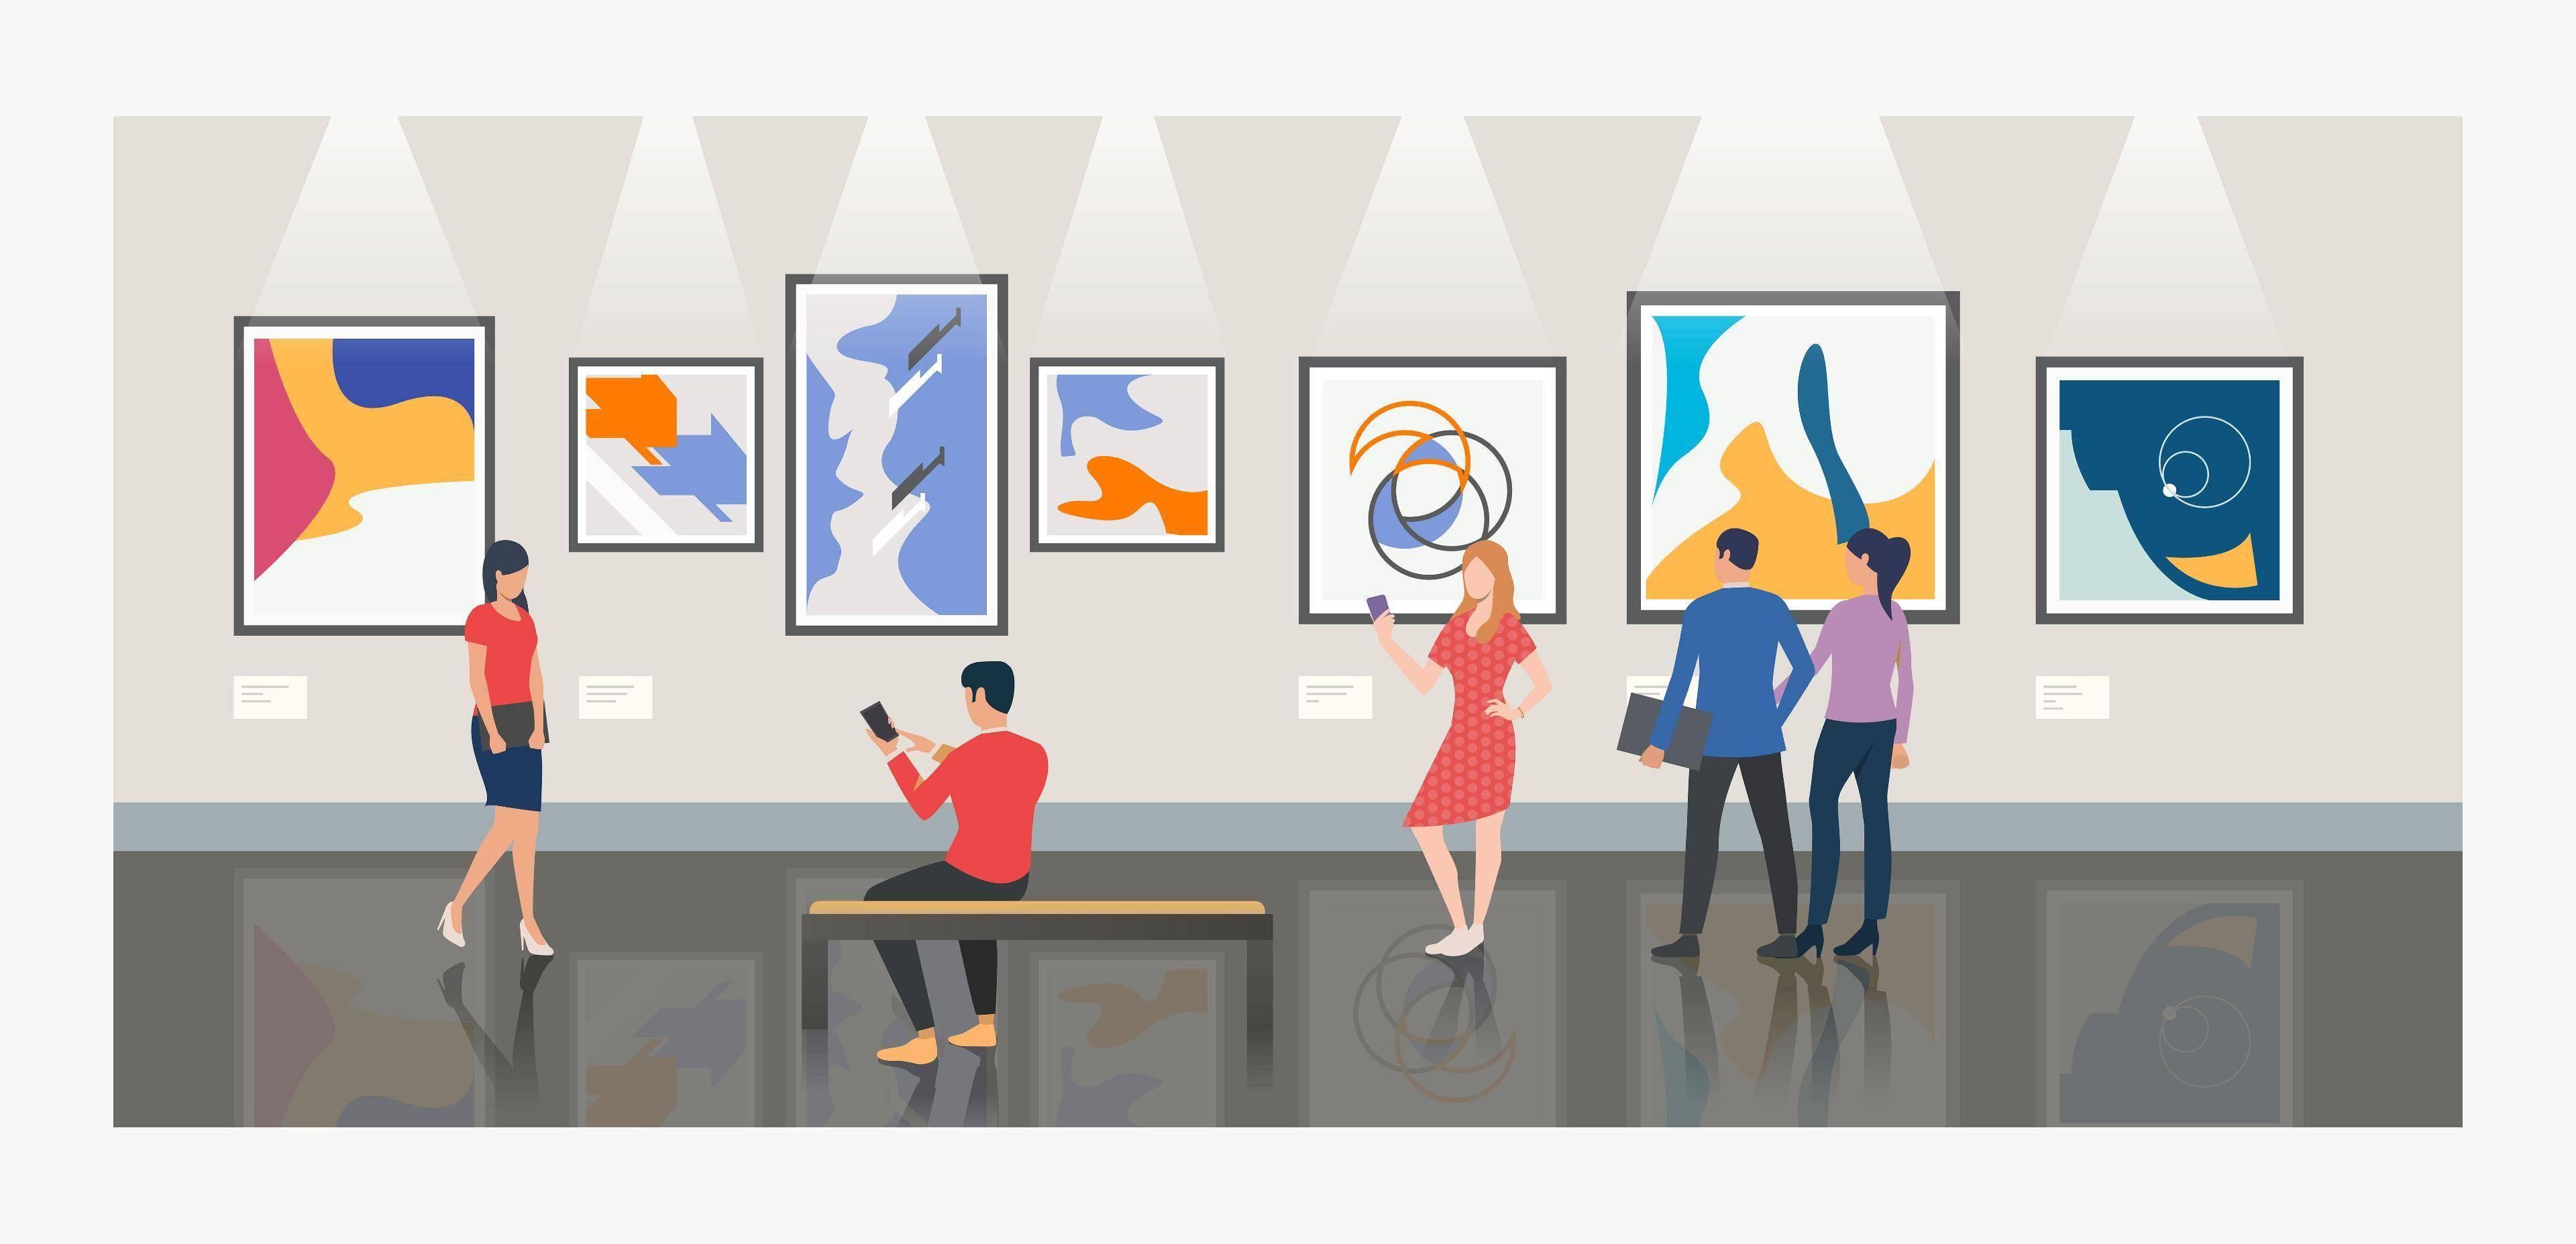 https://ru.freepik.com/free-vector/men-and-women-visiting-museum-or-art-gallery-illustration_4332400.htm#query=art%20gallery&position=3&from_view=search